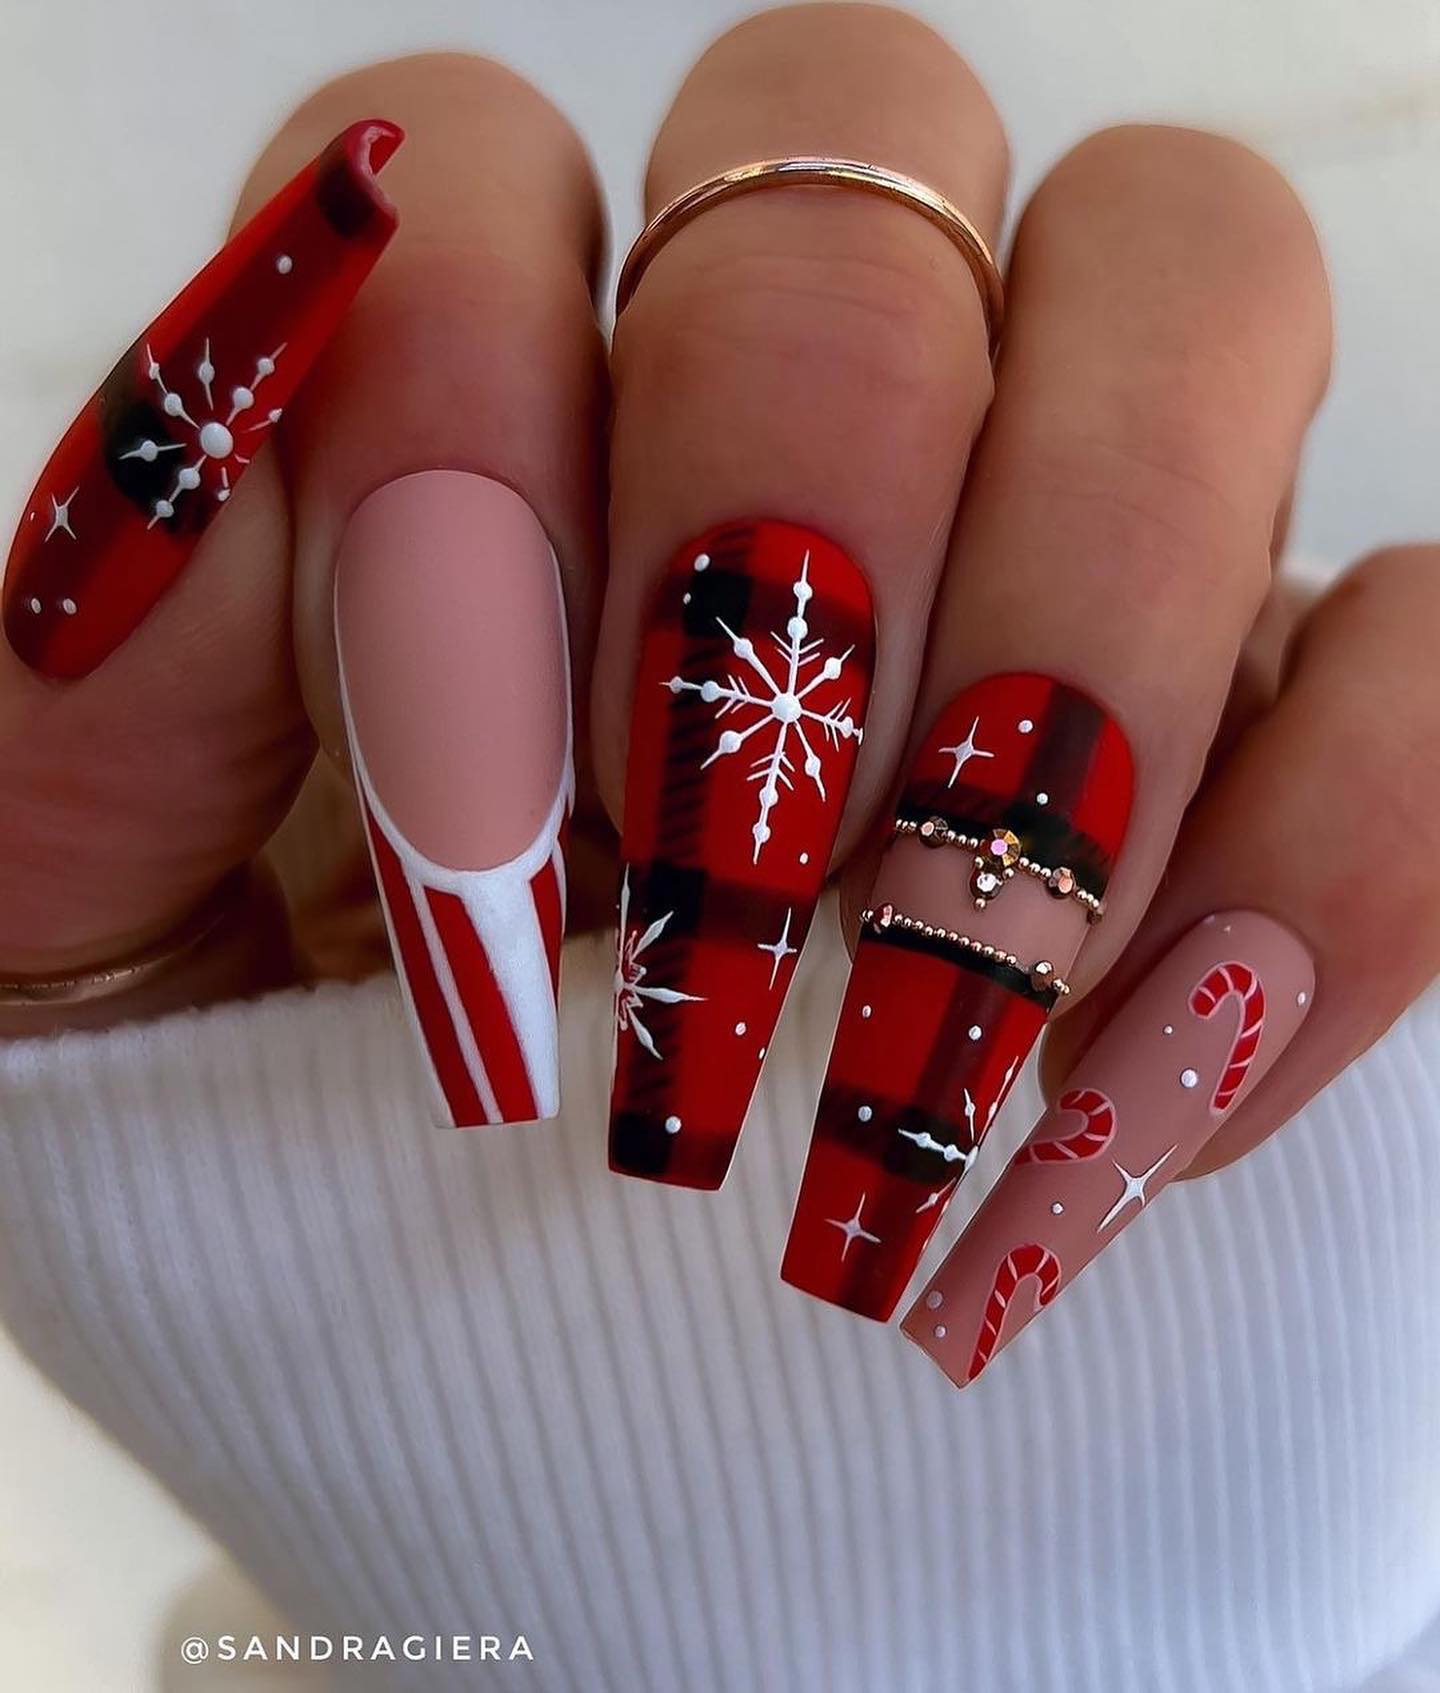 100+ Gorgeous Winter Nail Designs And Ideas images 66